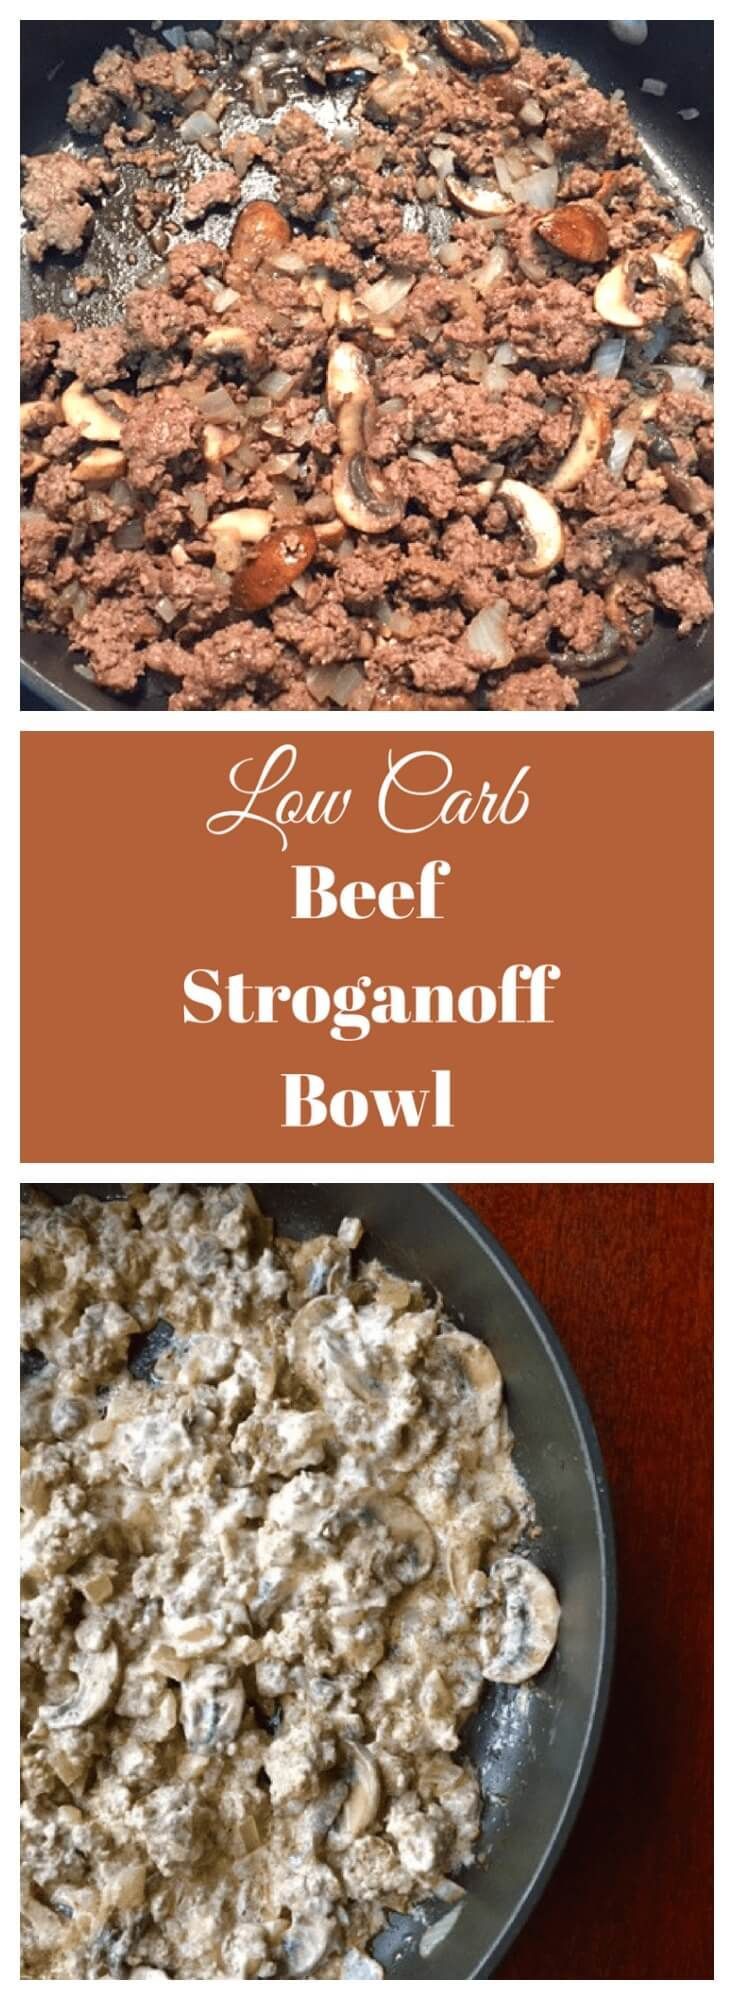 25 low carb beef recipes
 ideas